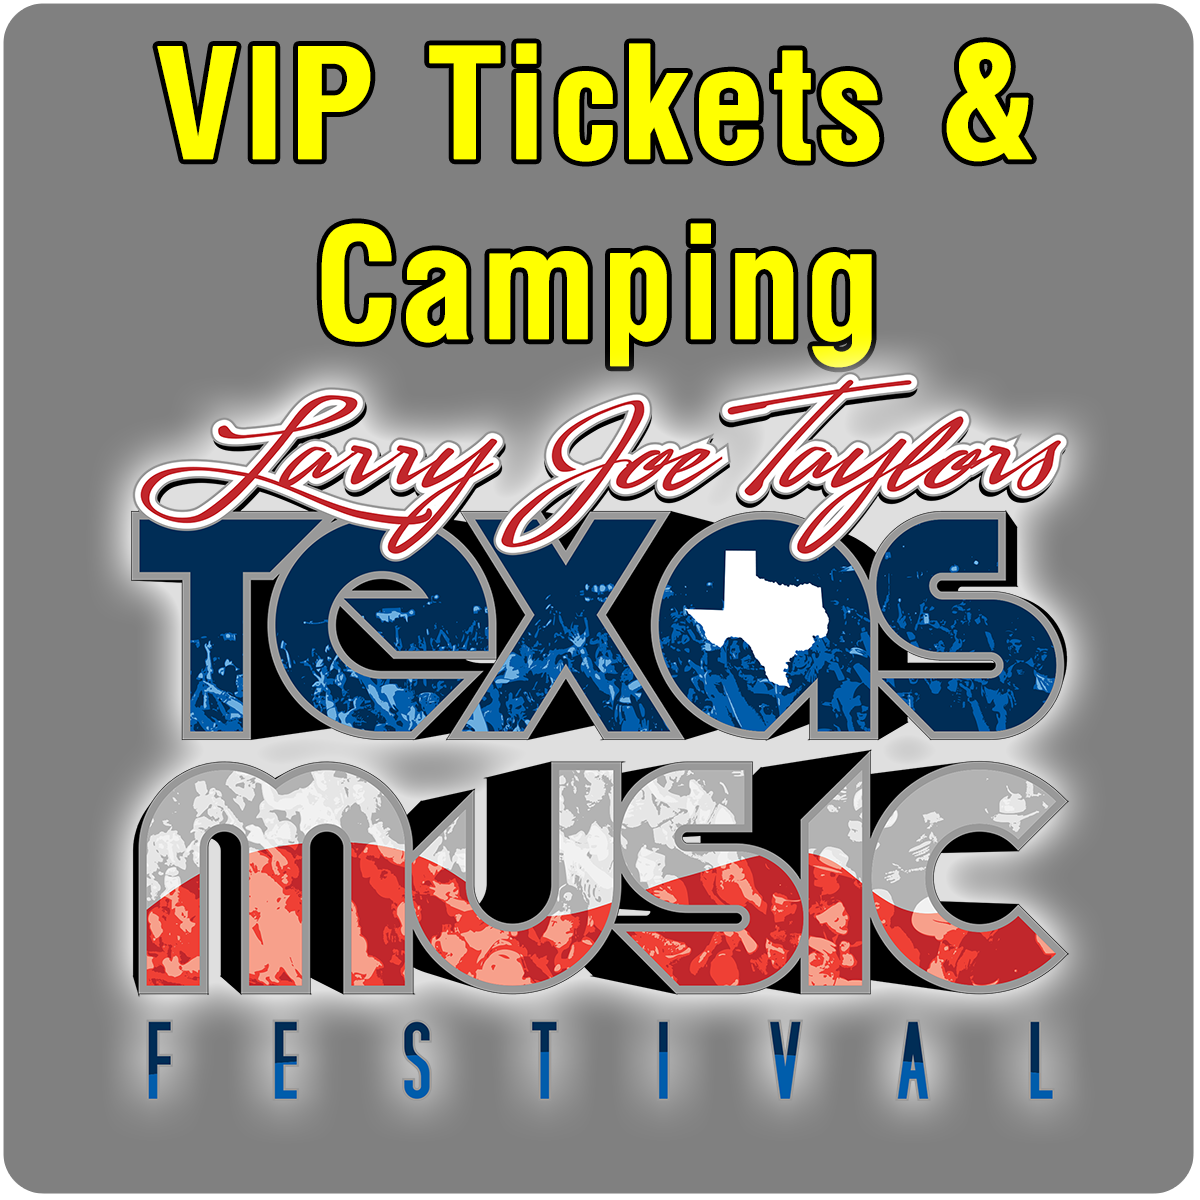 LJT Fest VIP Tickets & Camping Melody Mountain Ranch Inc.